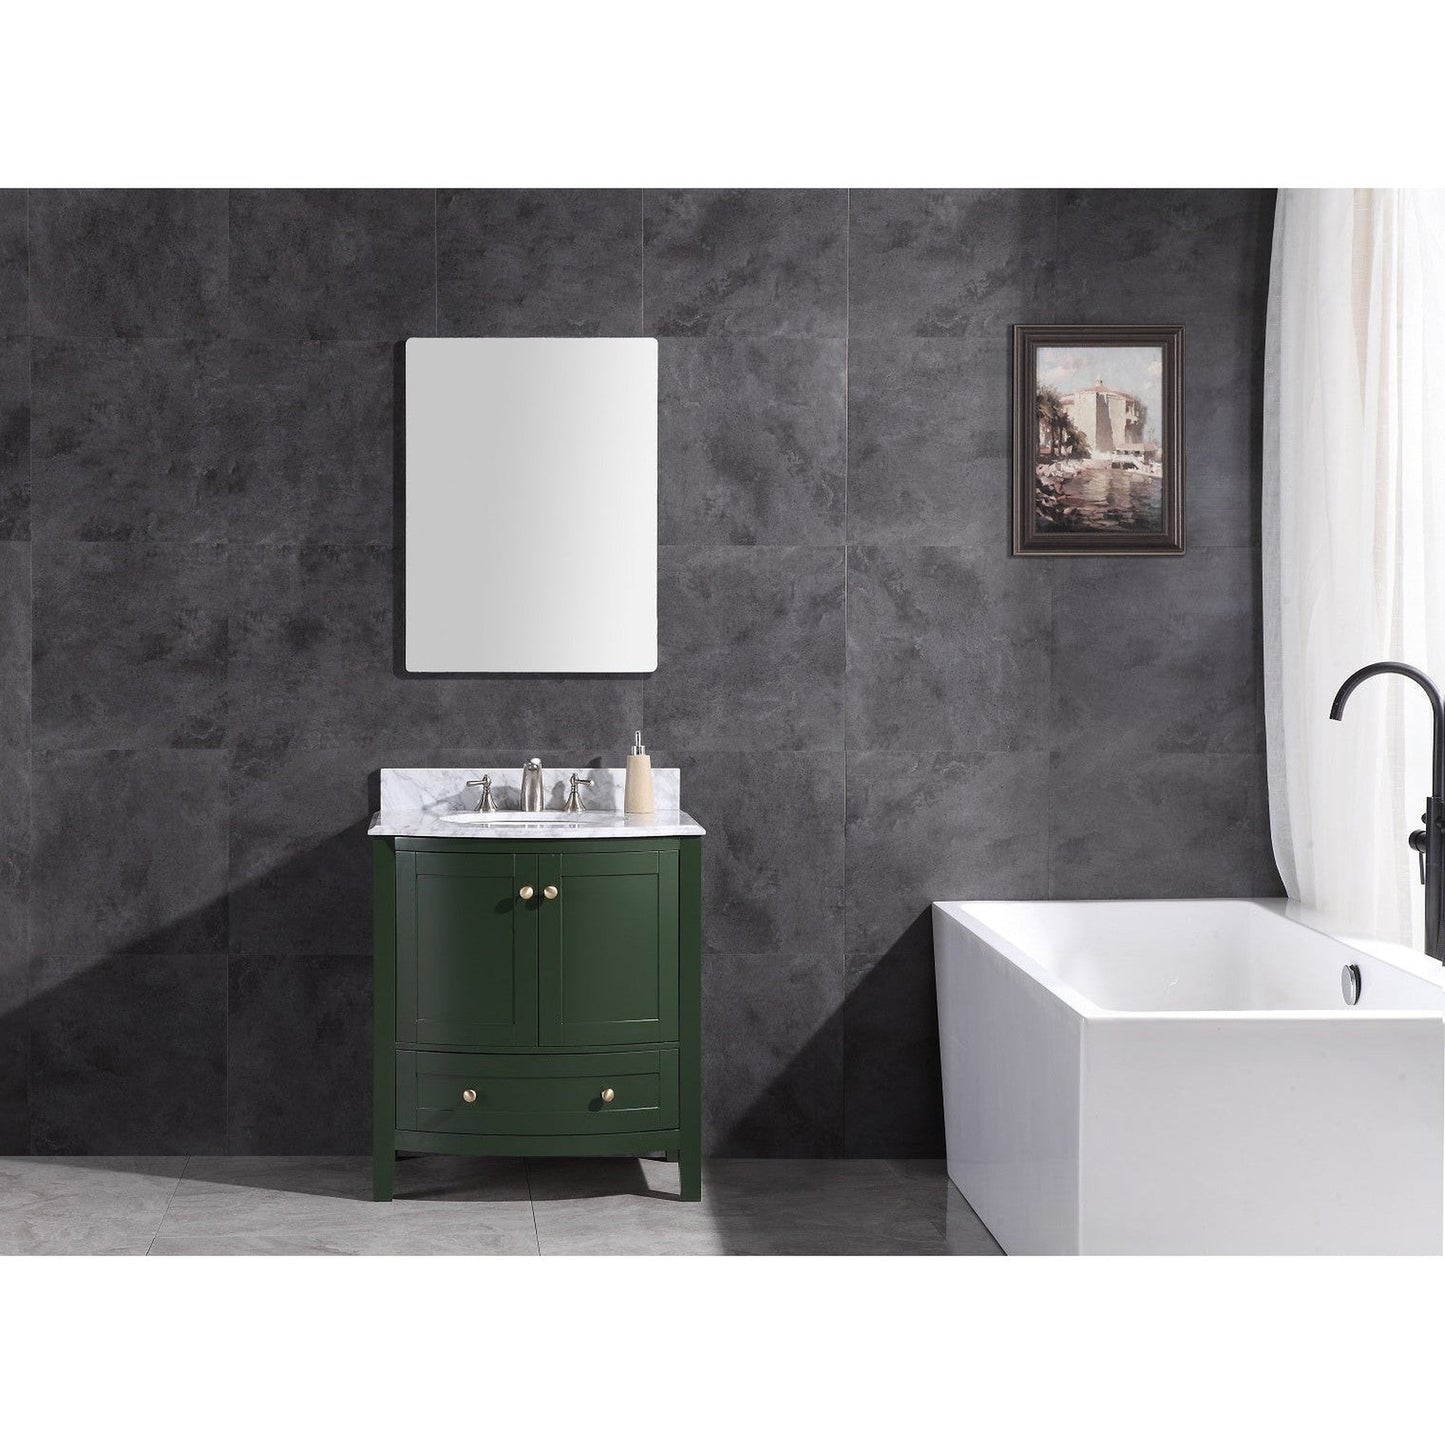 Legion Furniture WT9309 30" Vogue Green Freestanding PVC Vanity Cabinet With Marble Top and White Ceramic Sink